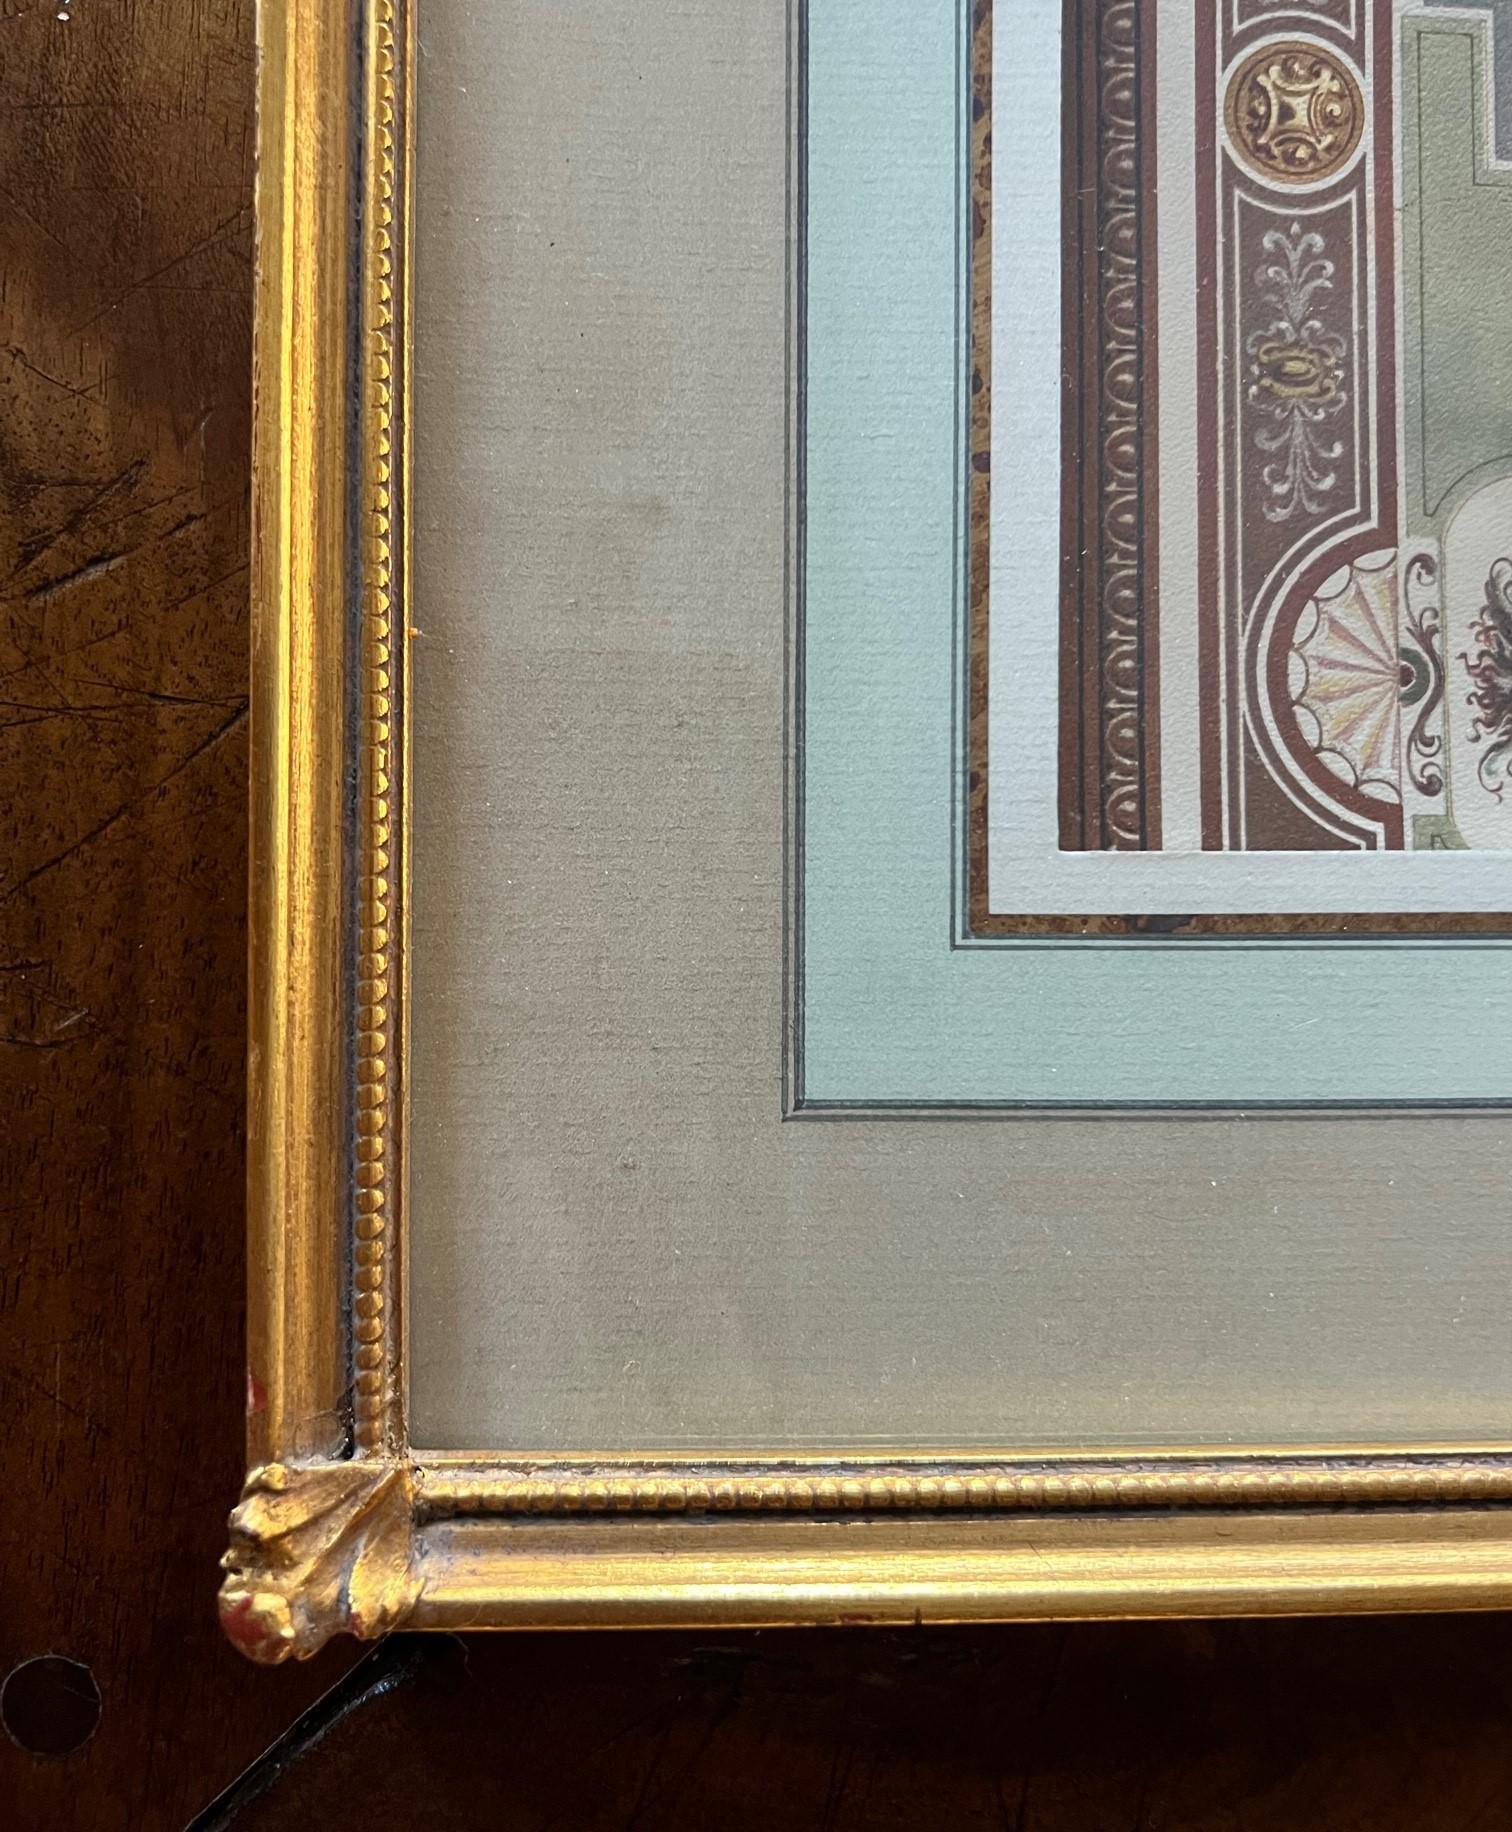 Framed Antique Chromolithograph - Uffizi Gallery Ceiling, Florence, Italy In Good Condition For Sale In Morristown, NJ